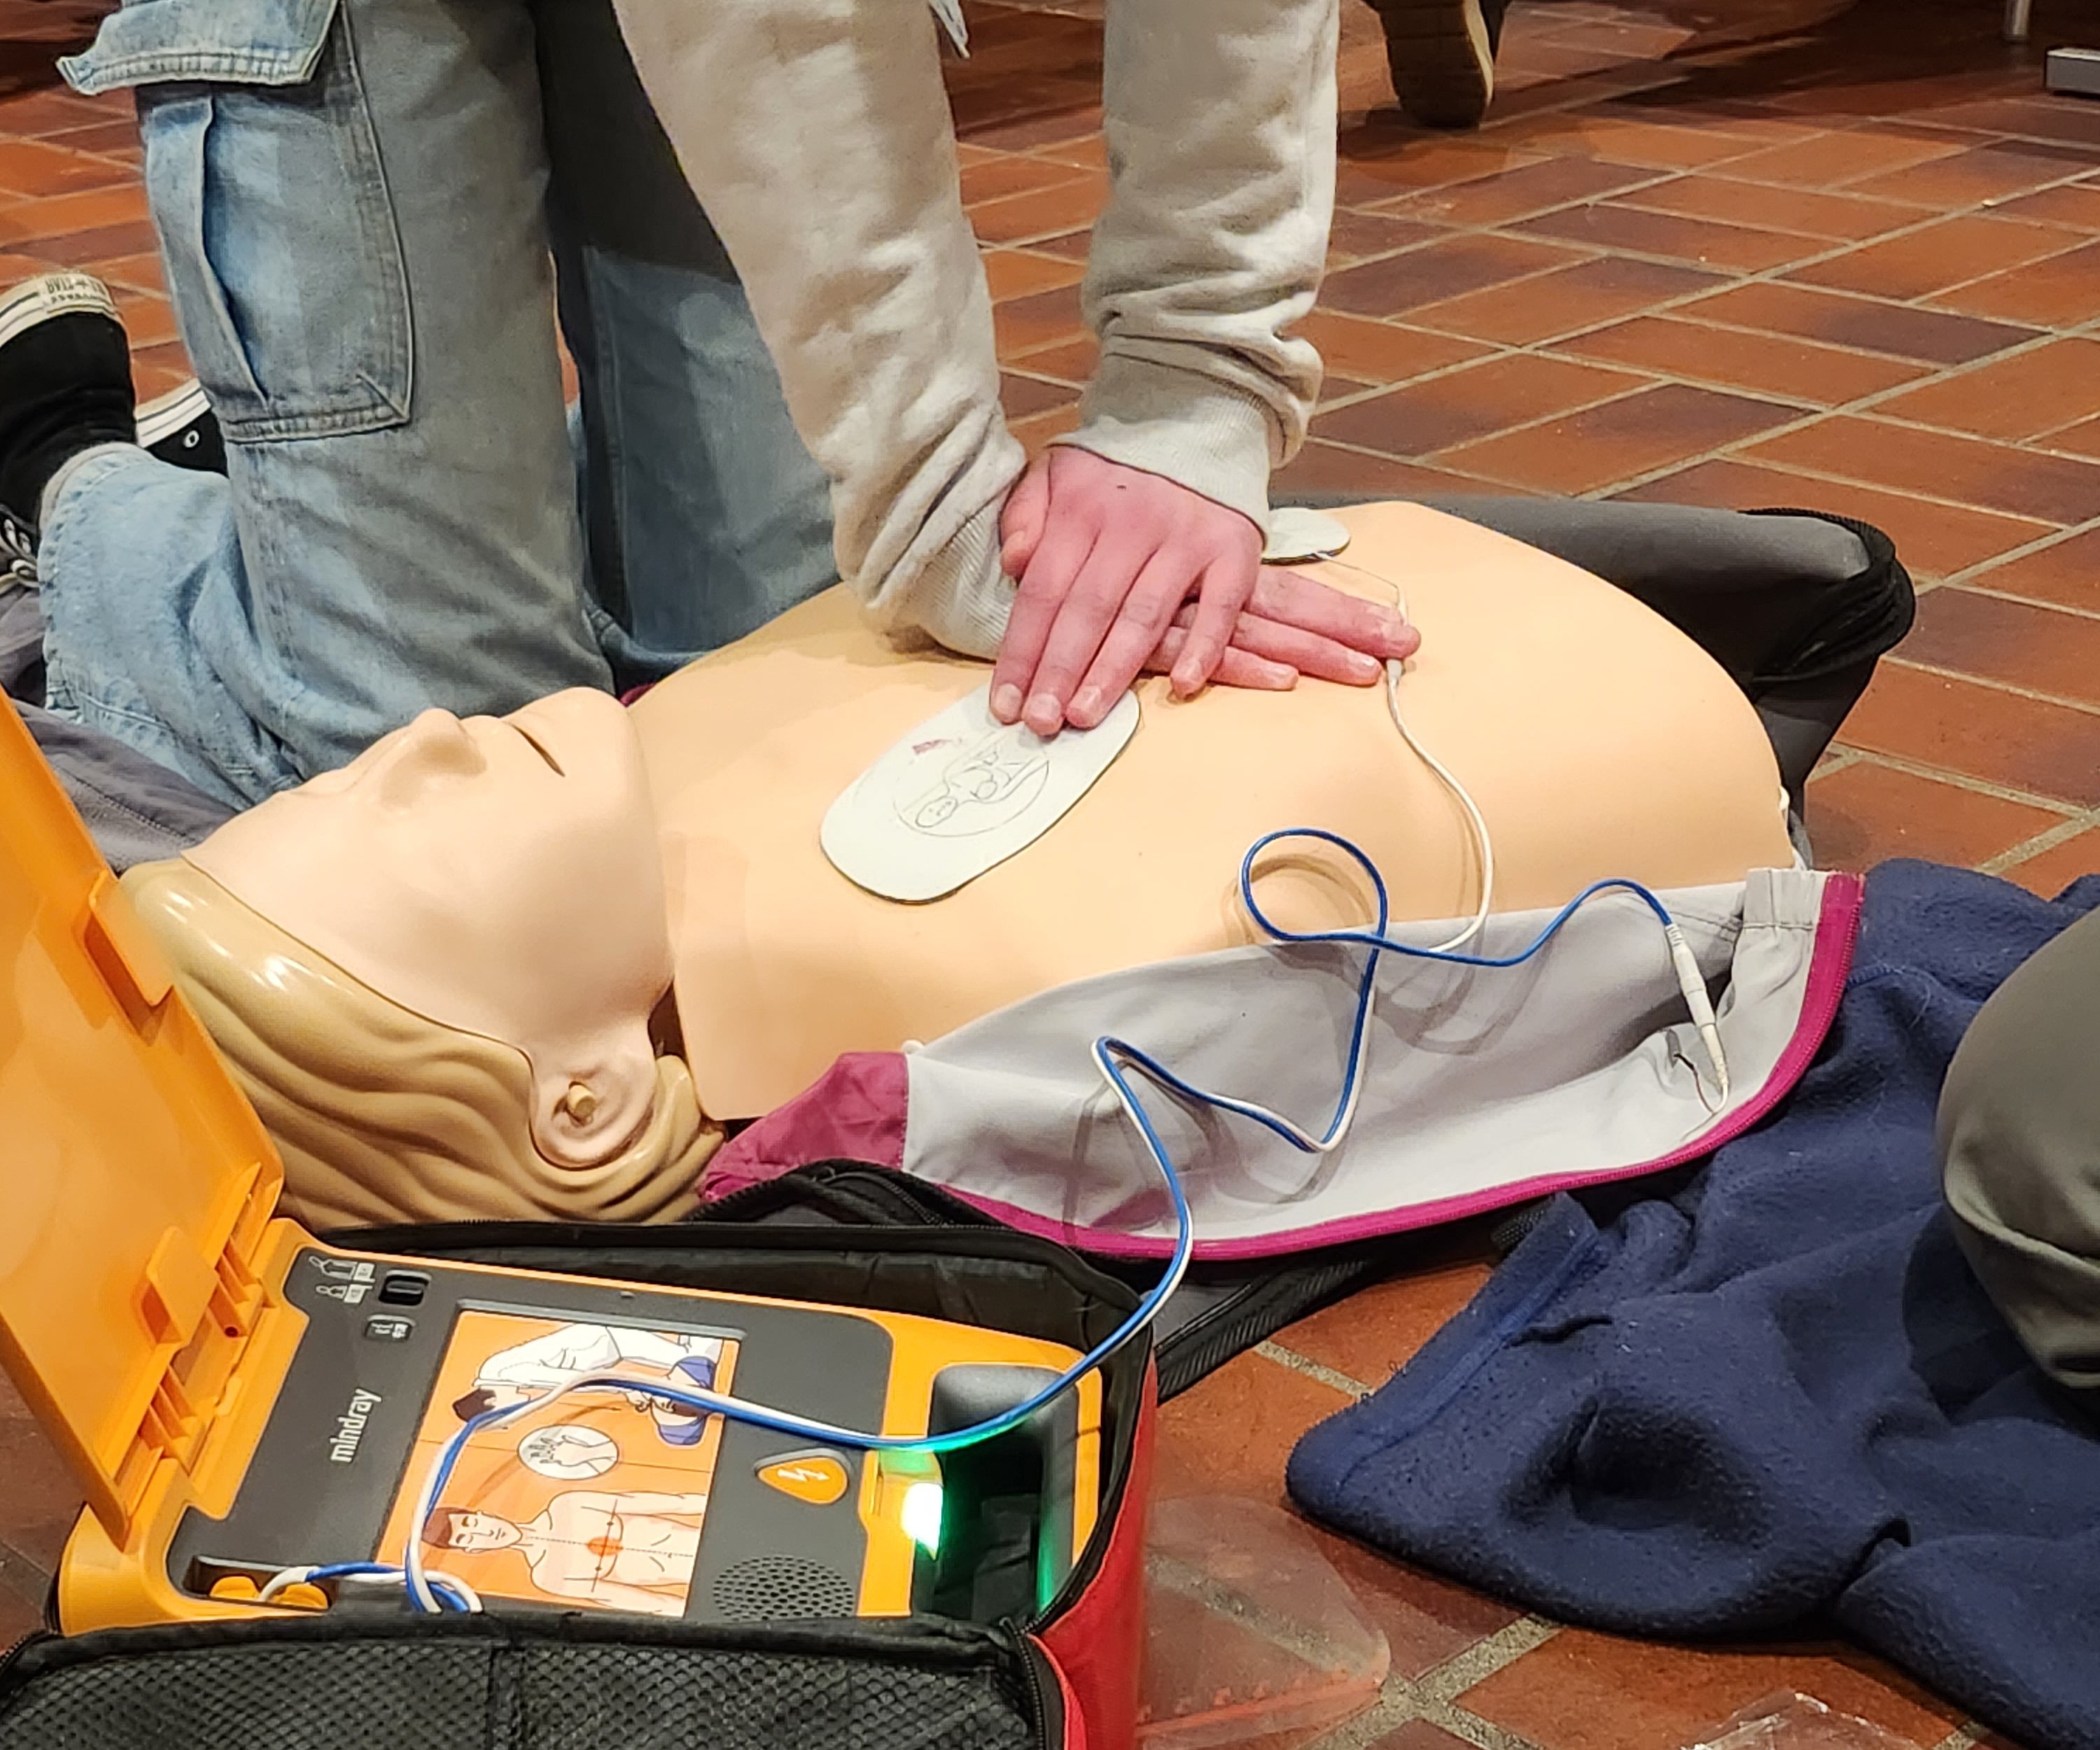 CPR course - have straight arms and sturdy legs while doing chest compressions